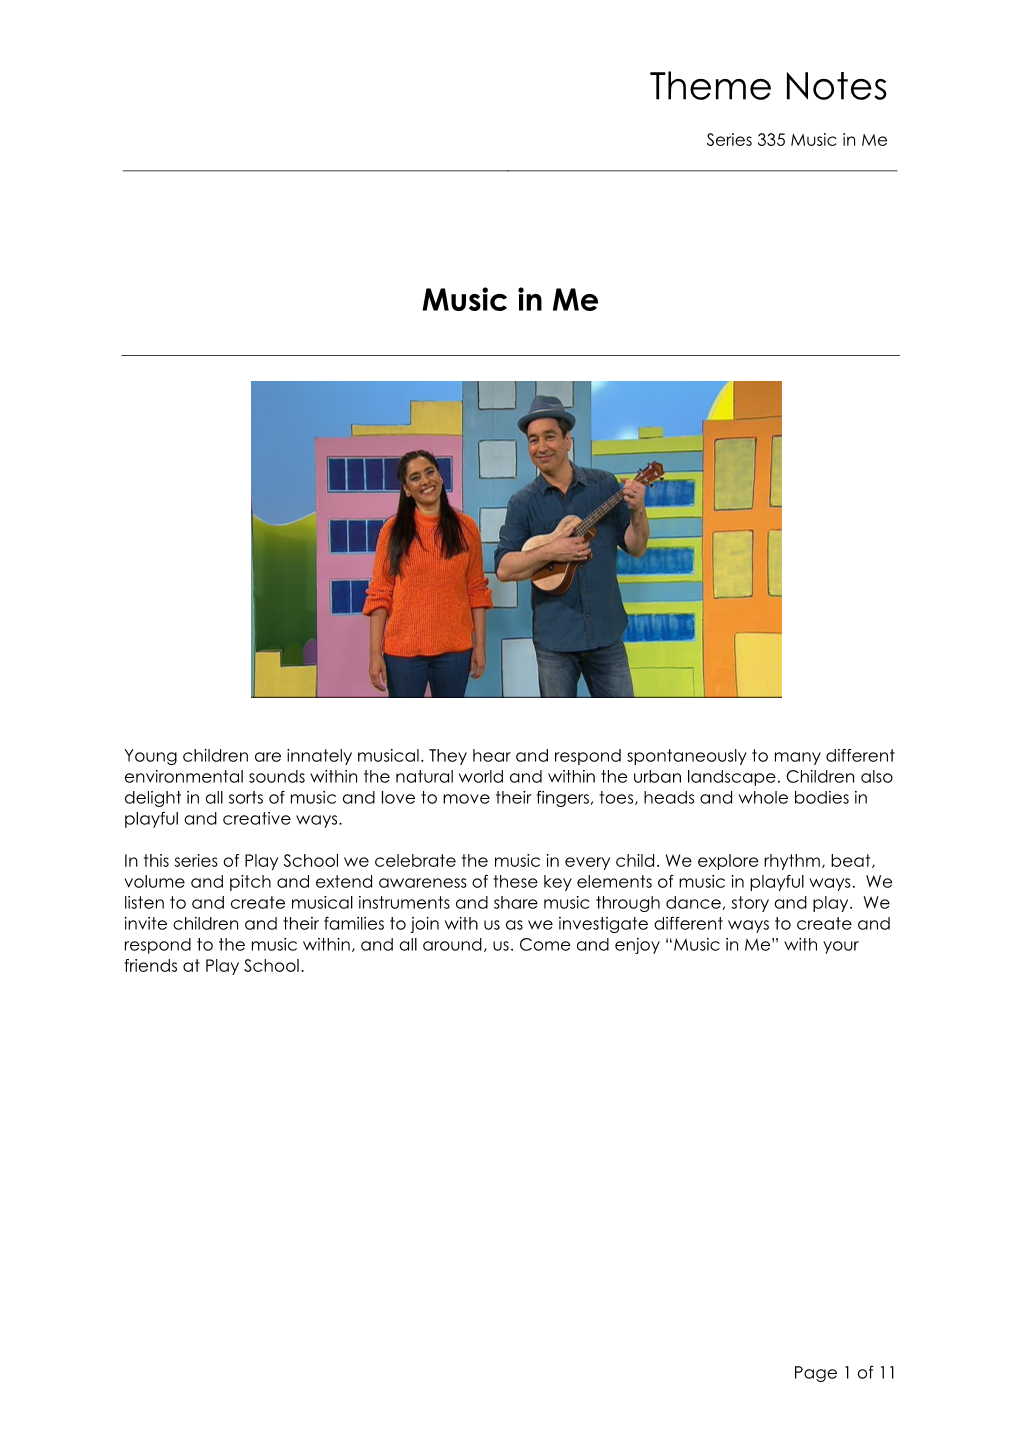 Download the Music in Me Theme Notes As a PDF